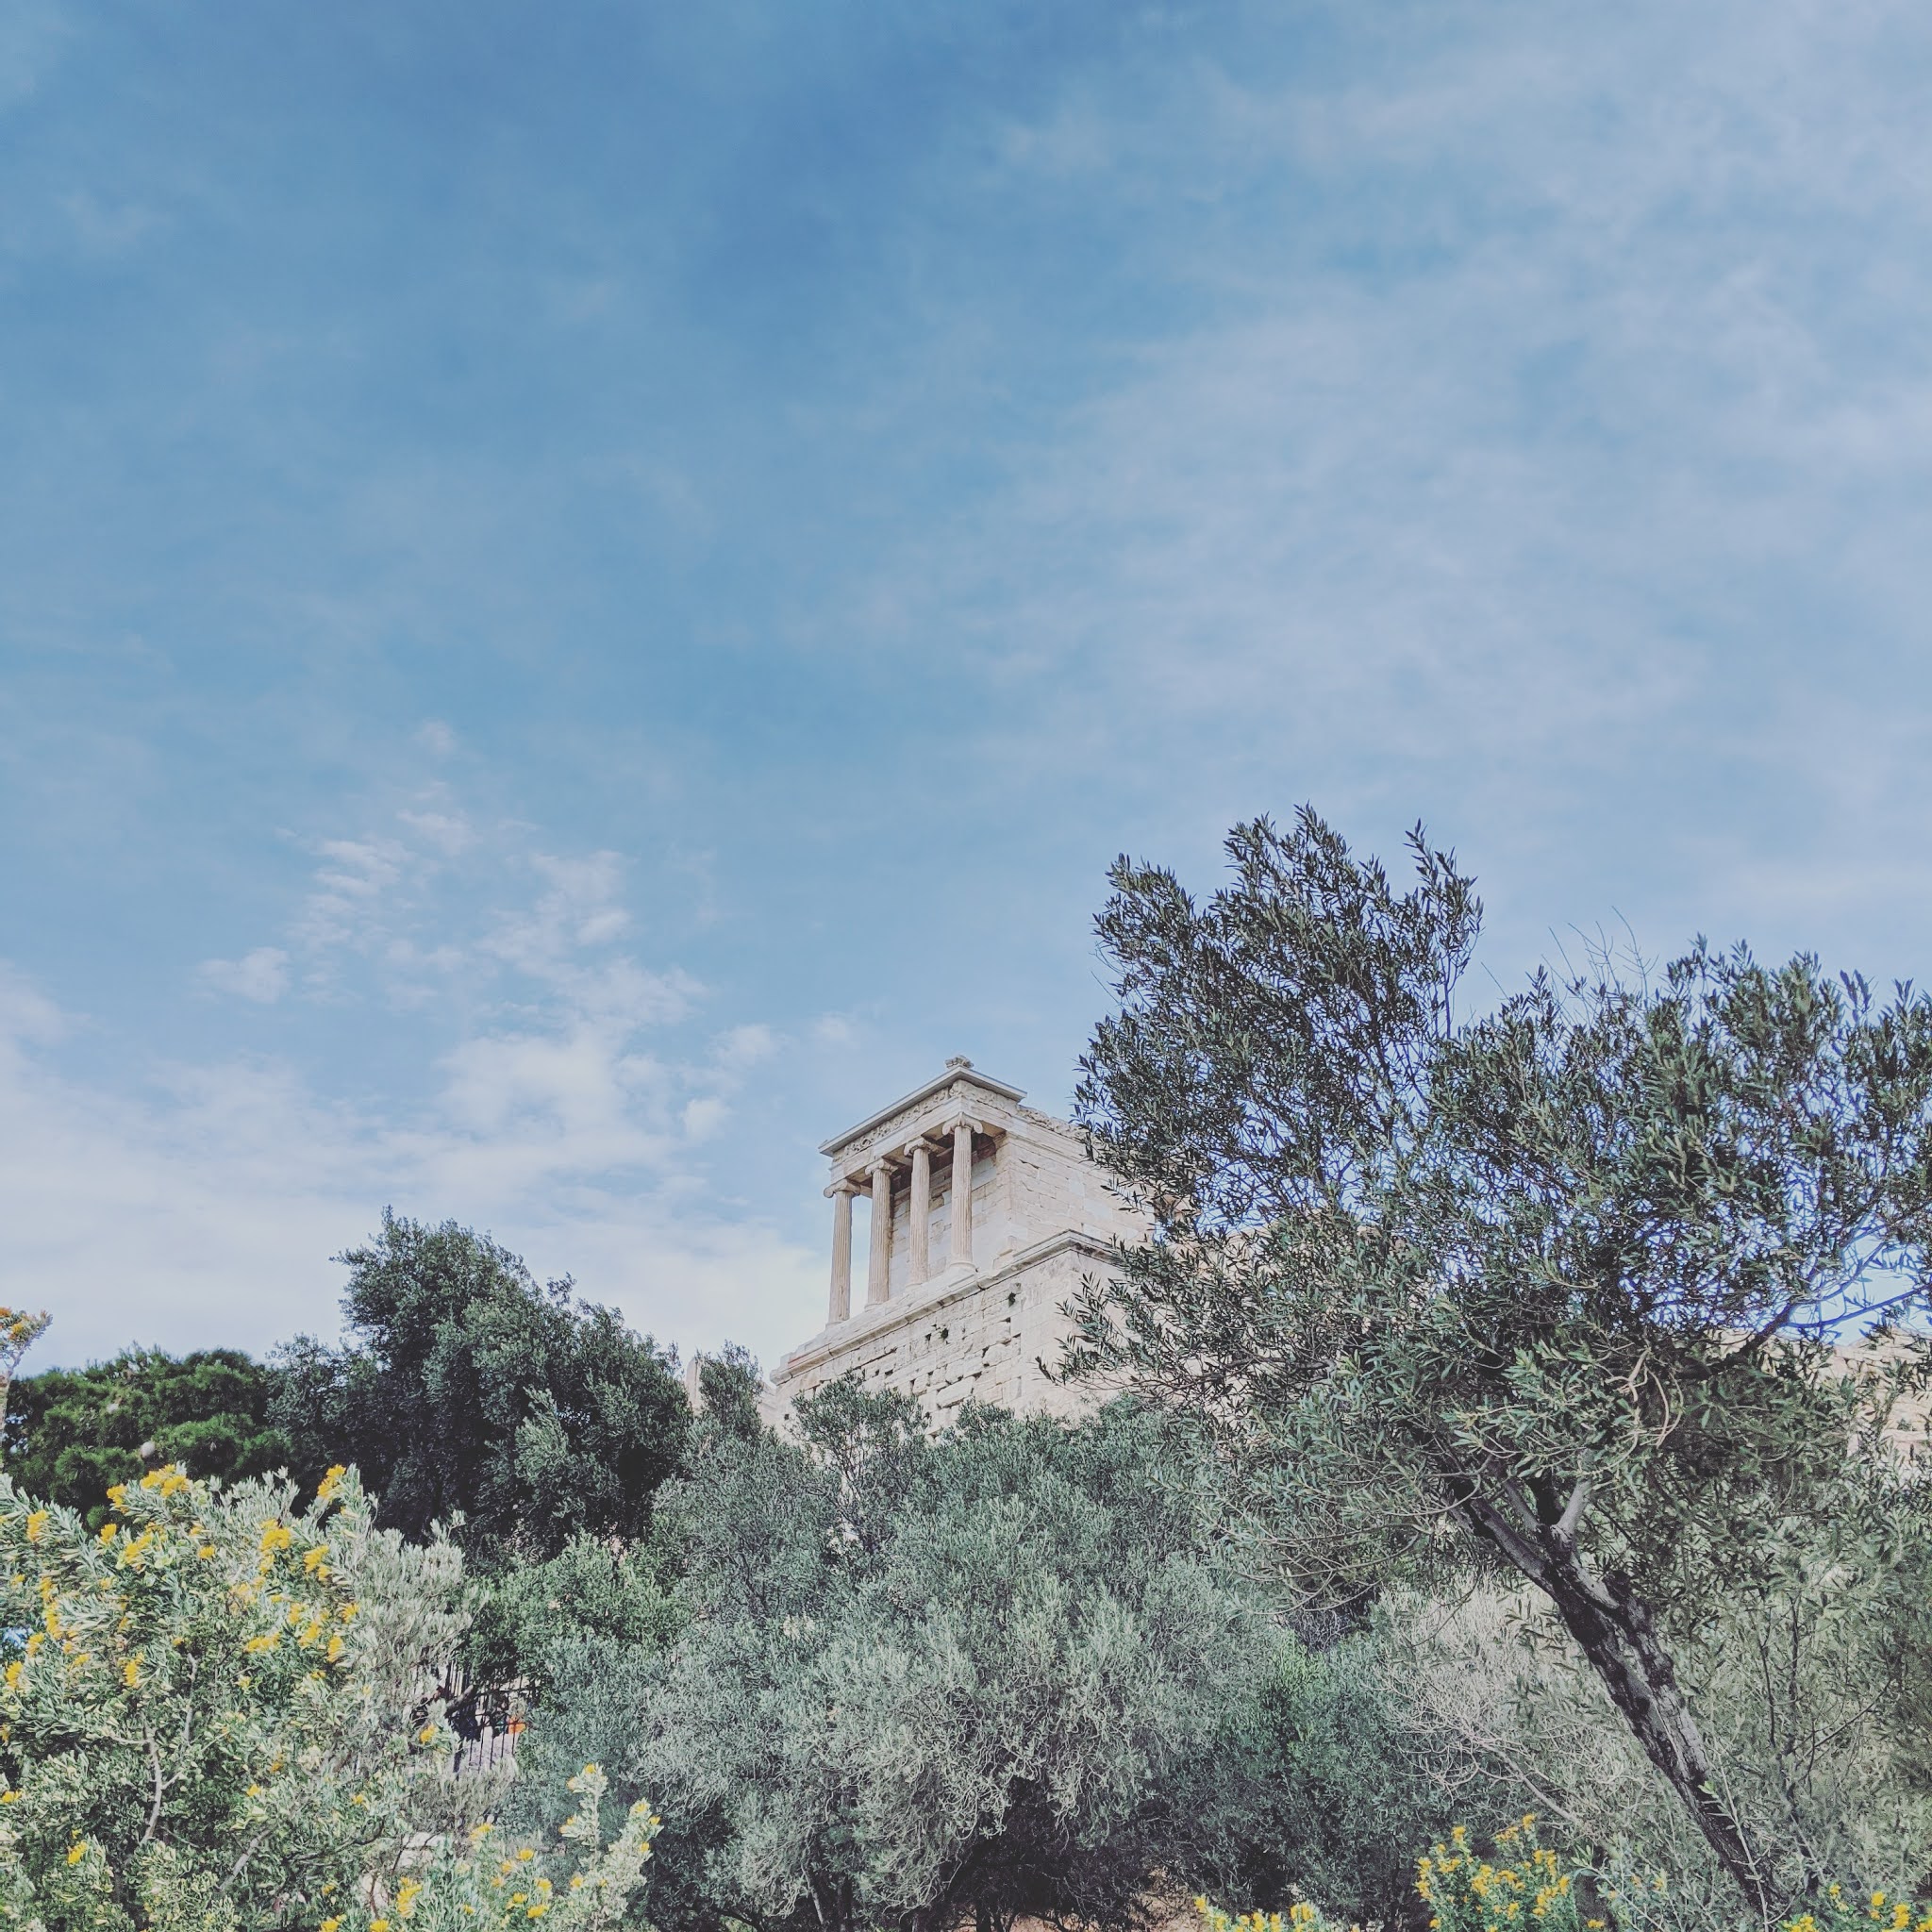 An ancient temple surrounded by olives trees against a blue sky backdrop in the acropolis in athens, Greece